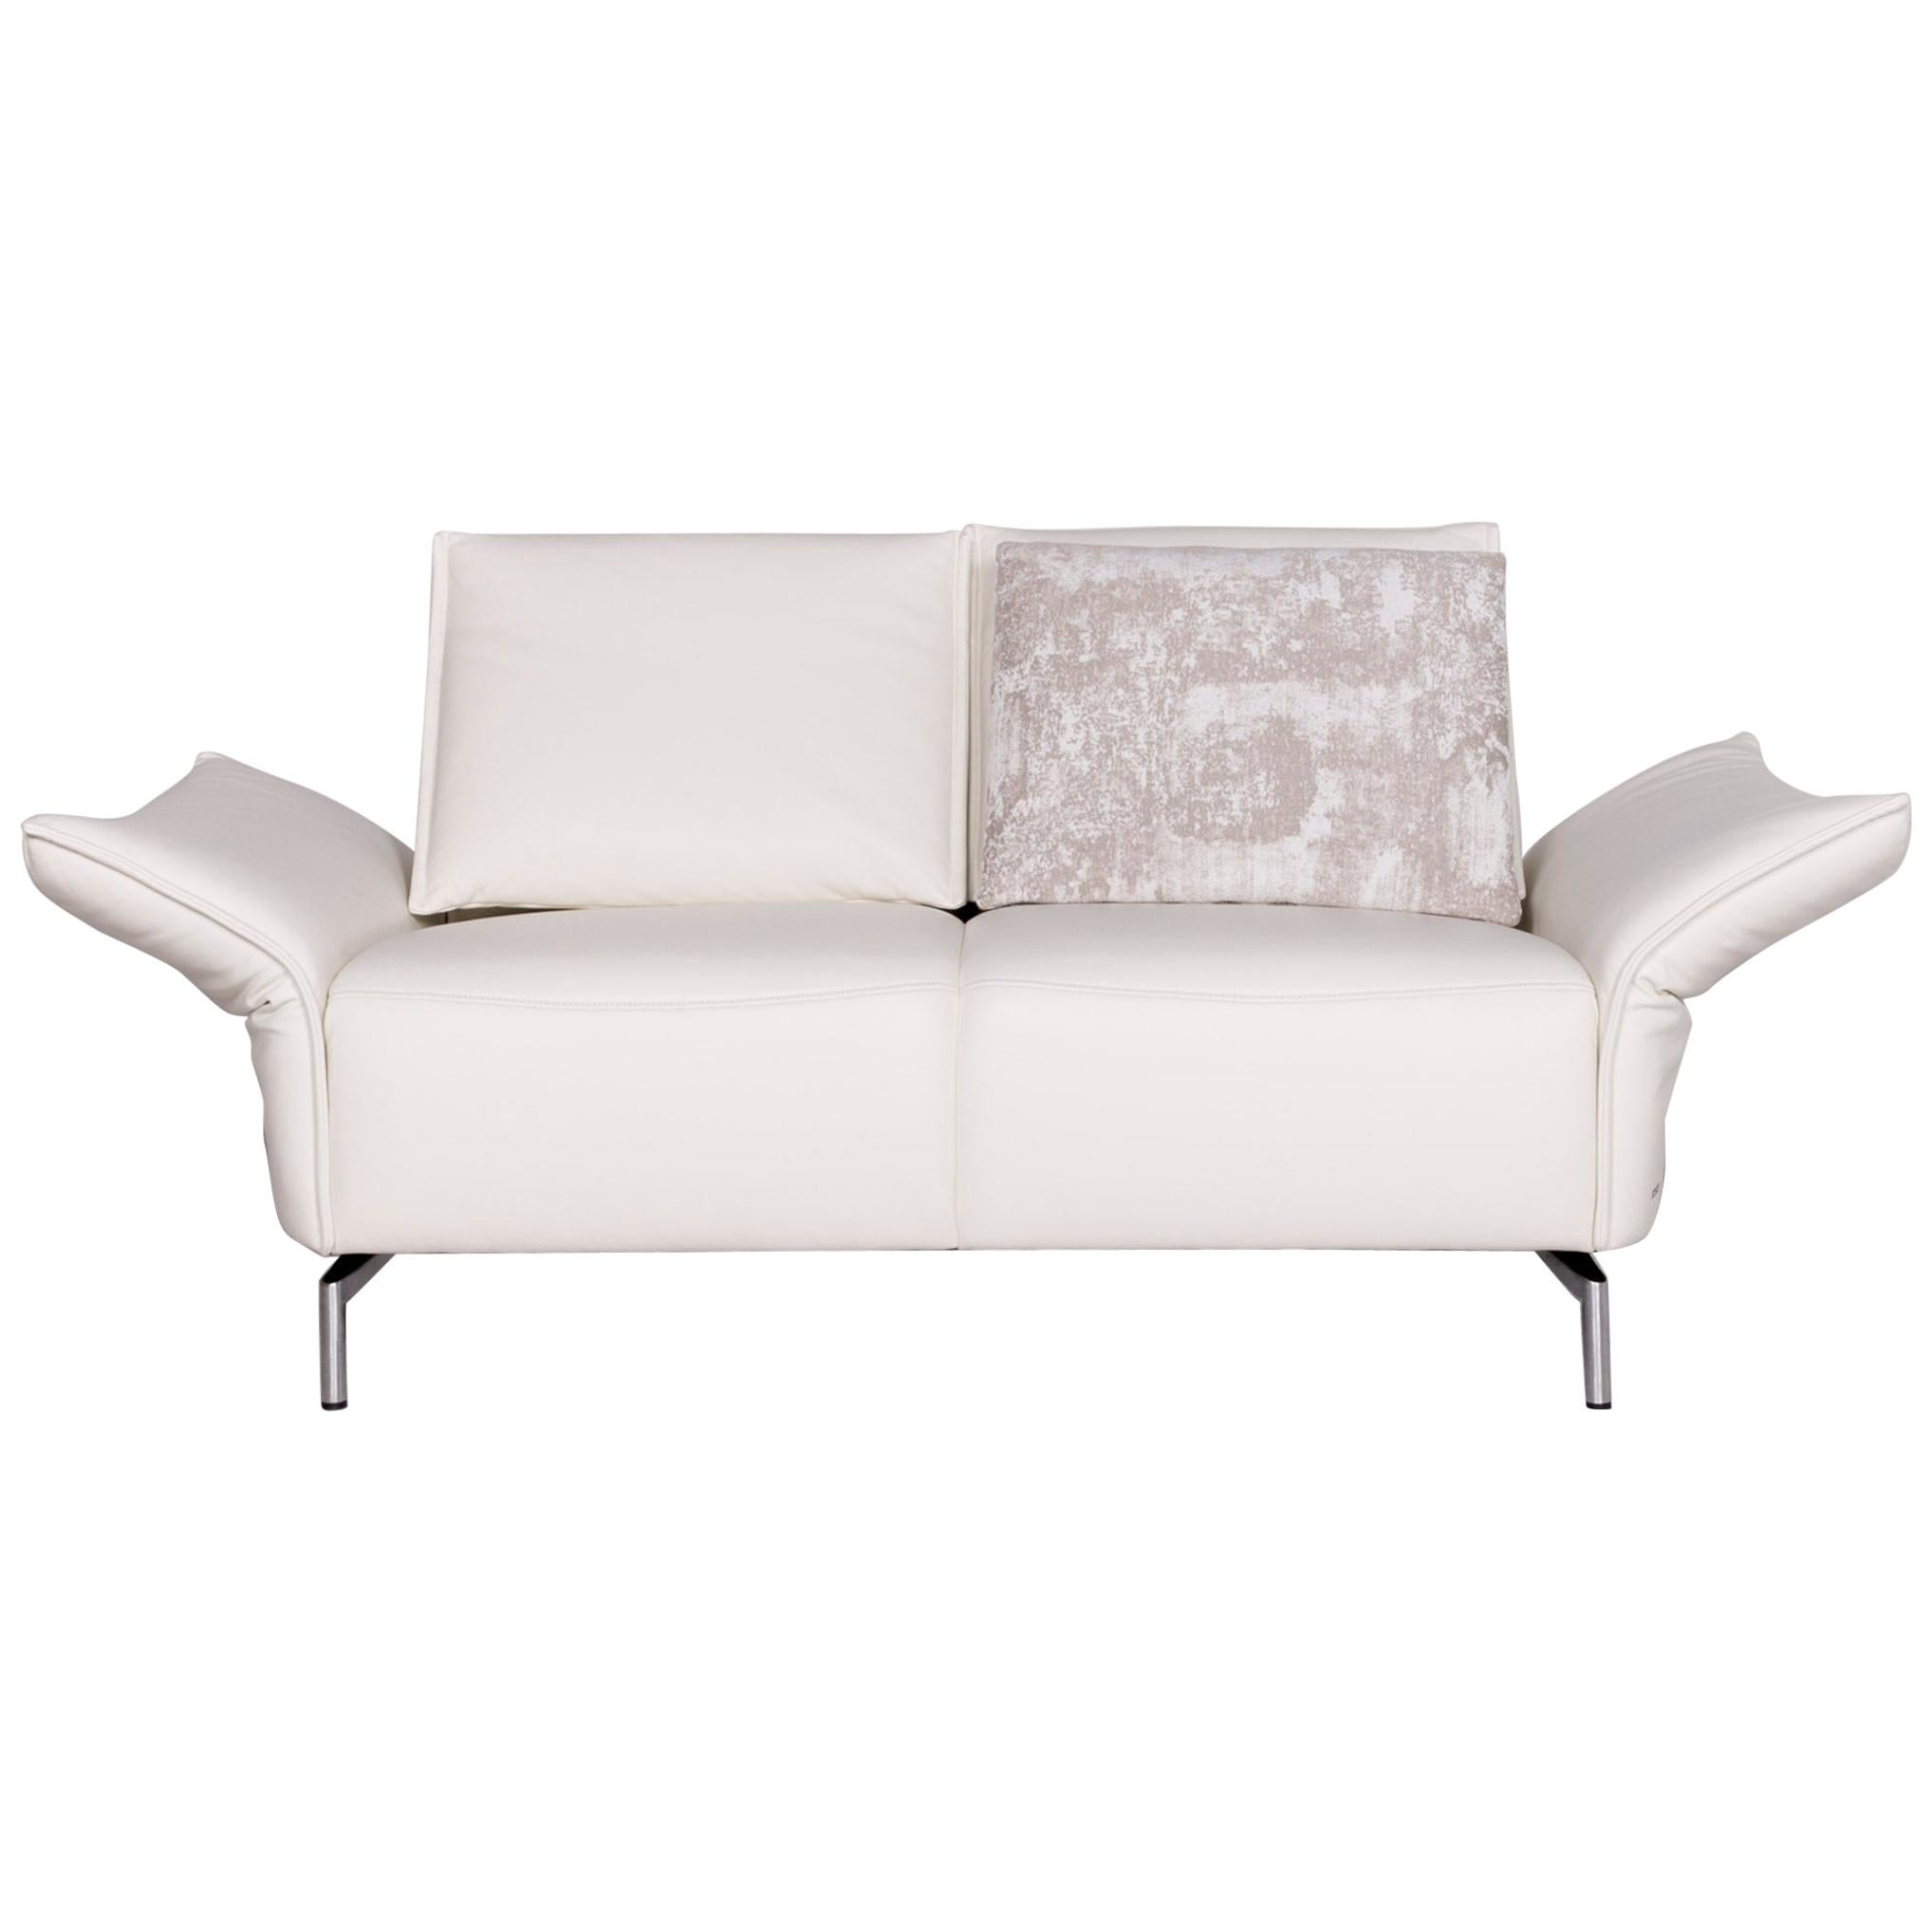 Koinor Vanda Designer Leather Sofa White Real Leather Two-Seat Couch